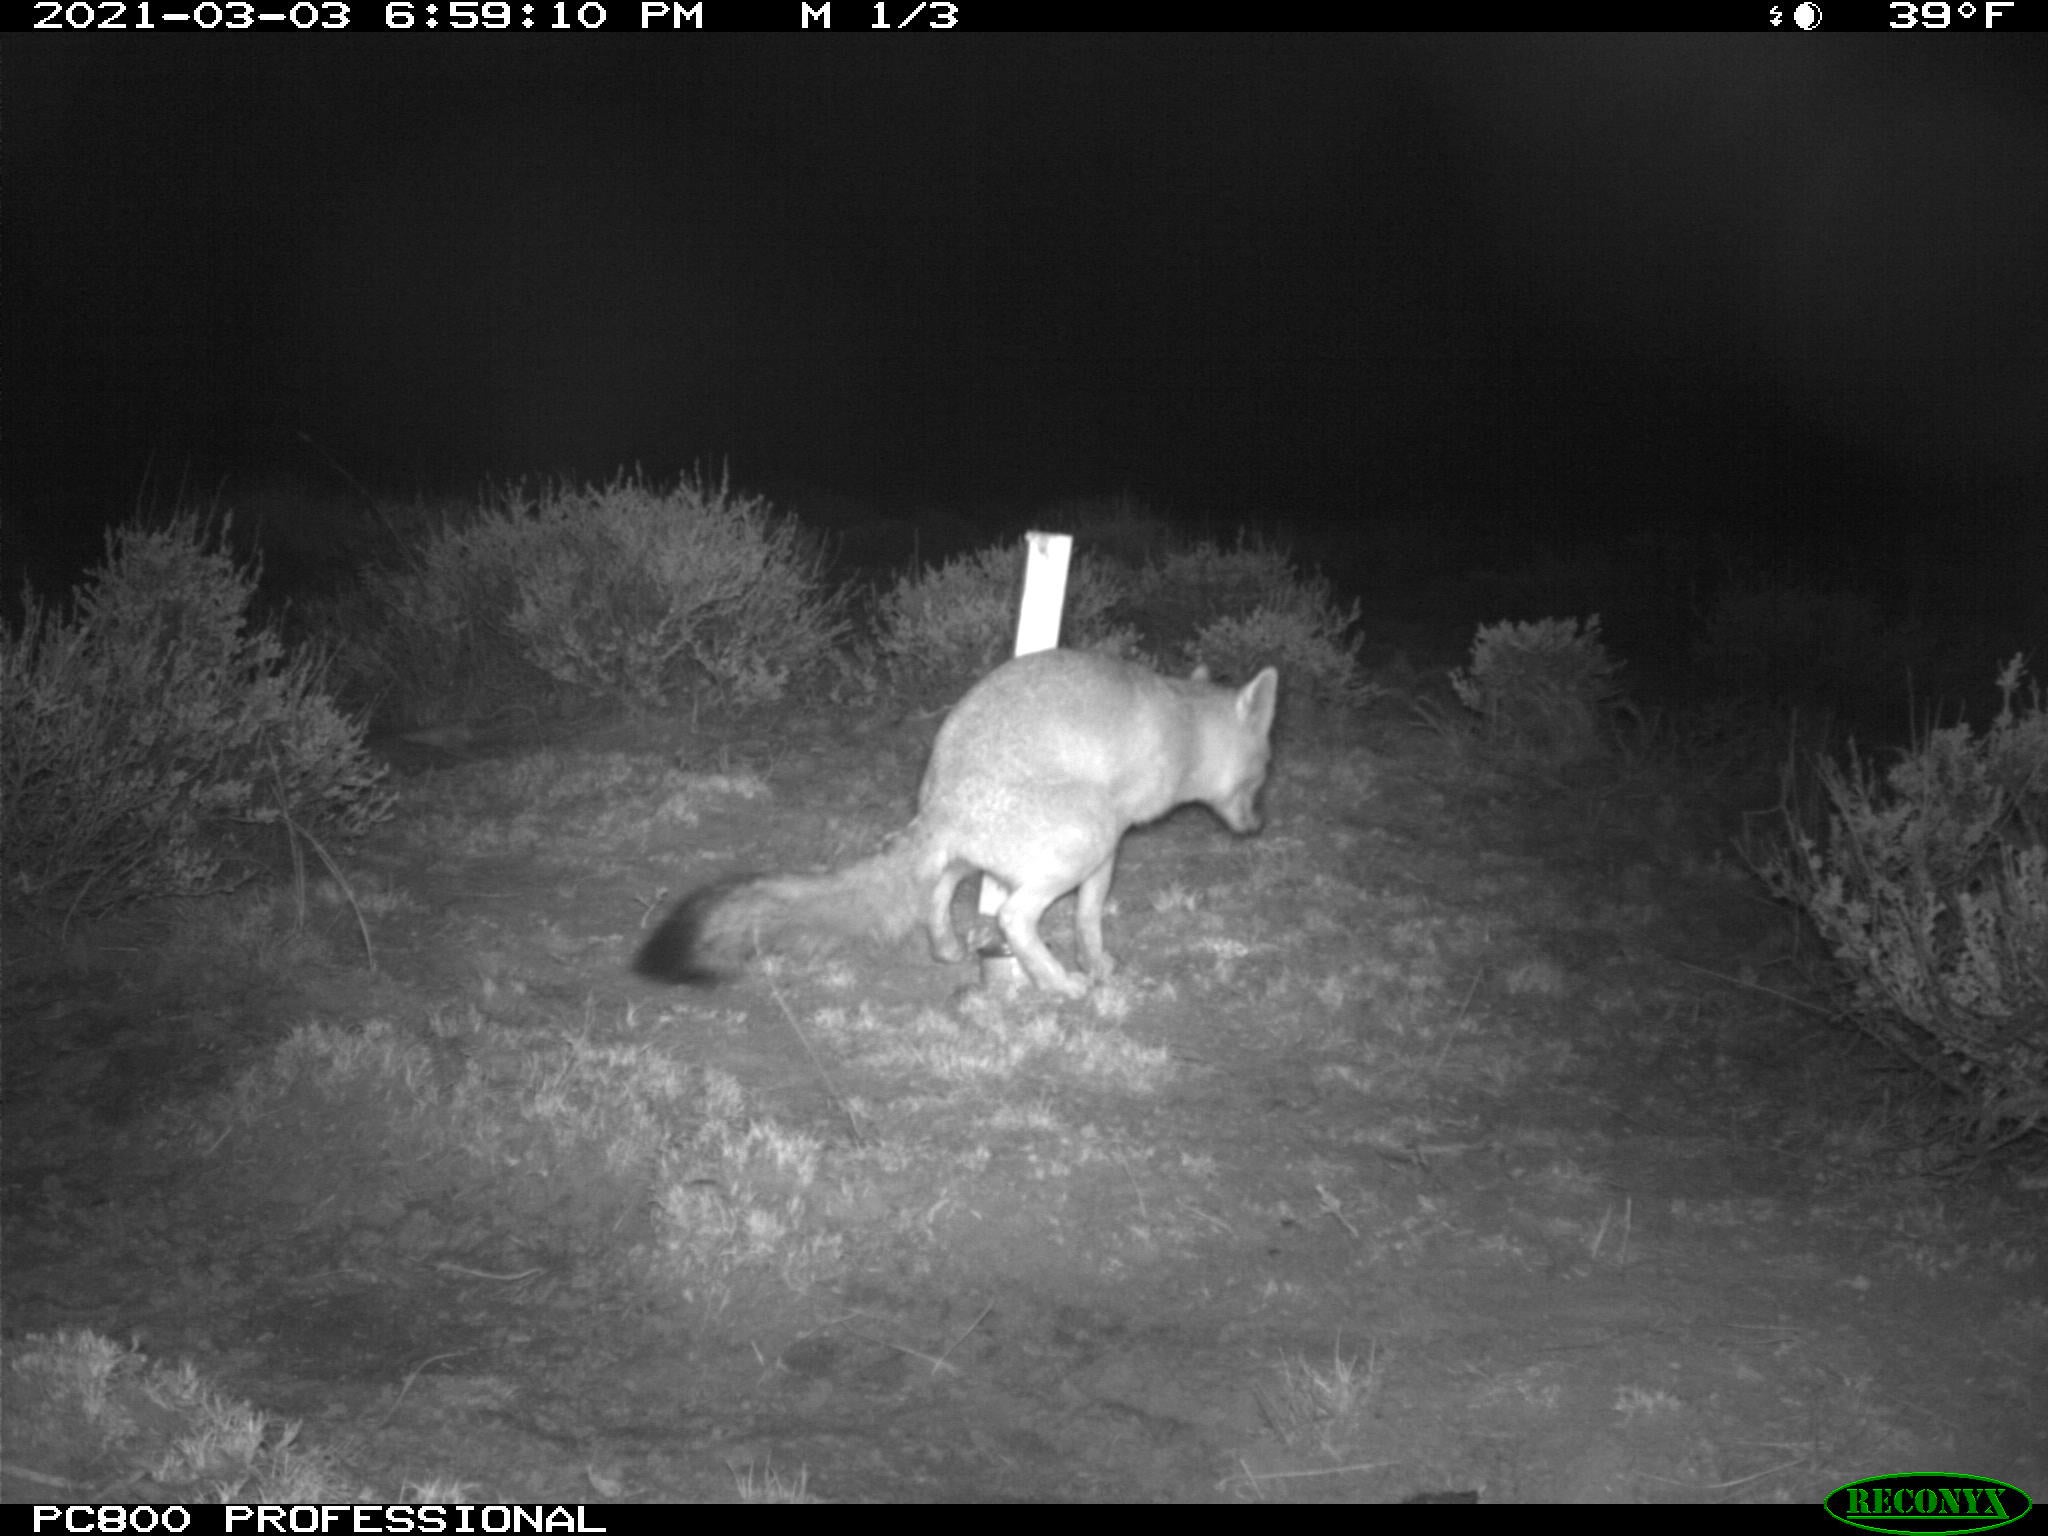 A nighttime photo of a swift fox pooping near a pole in the grass surrounded by shrubs